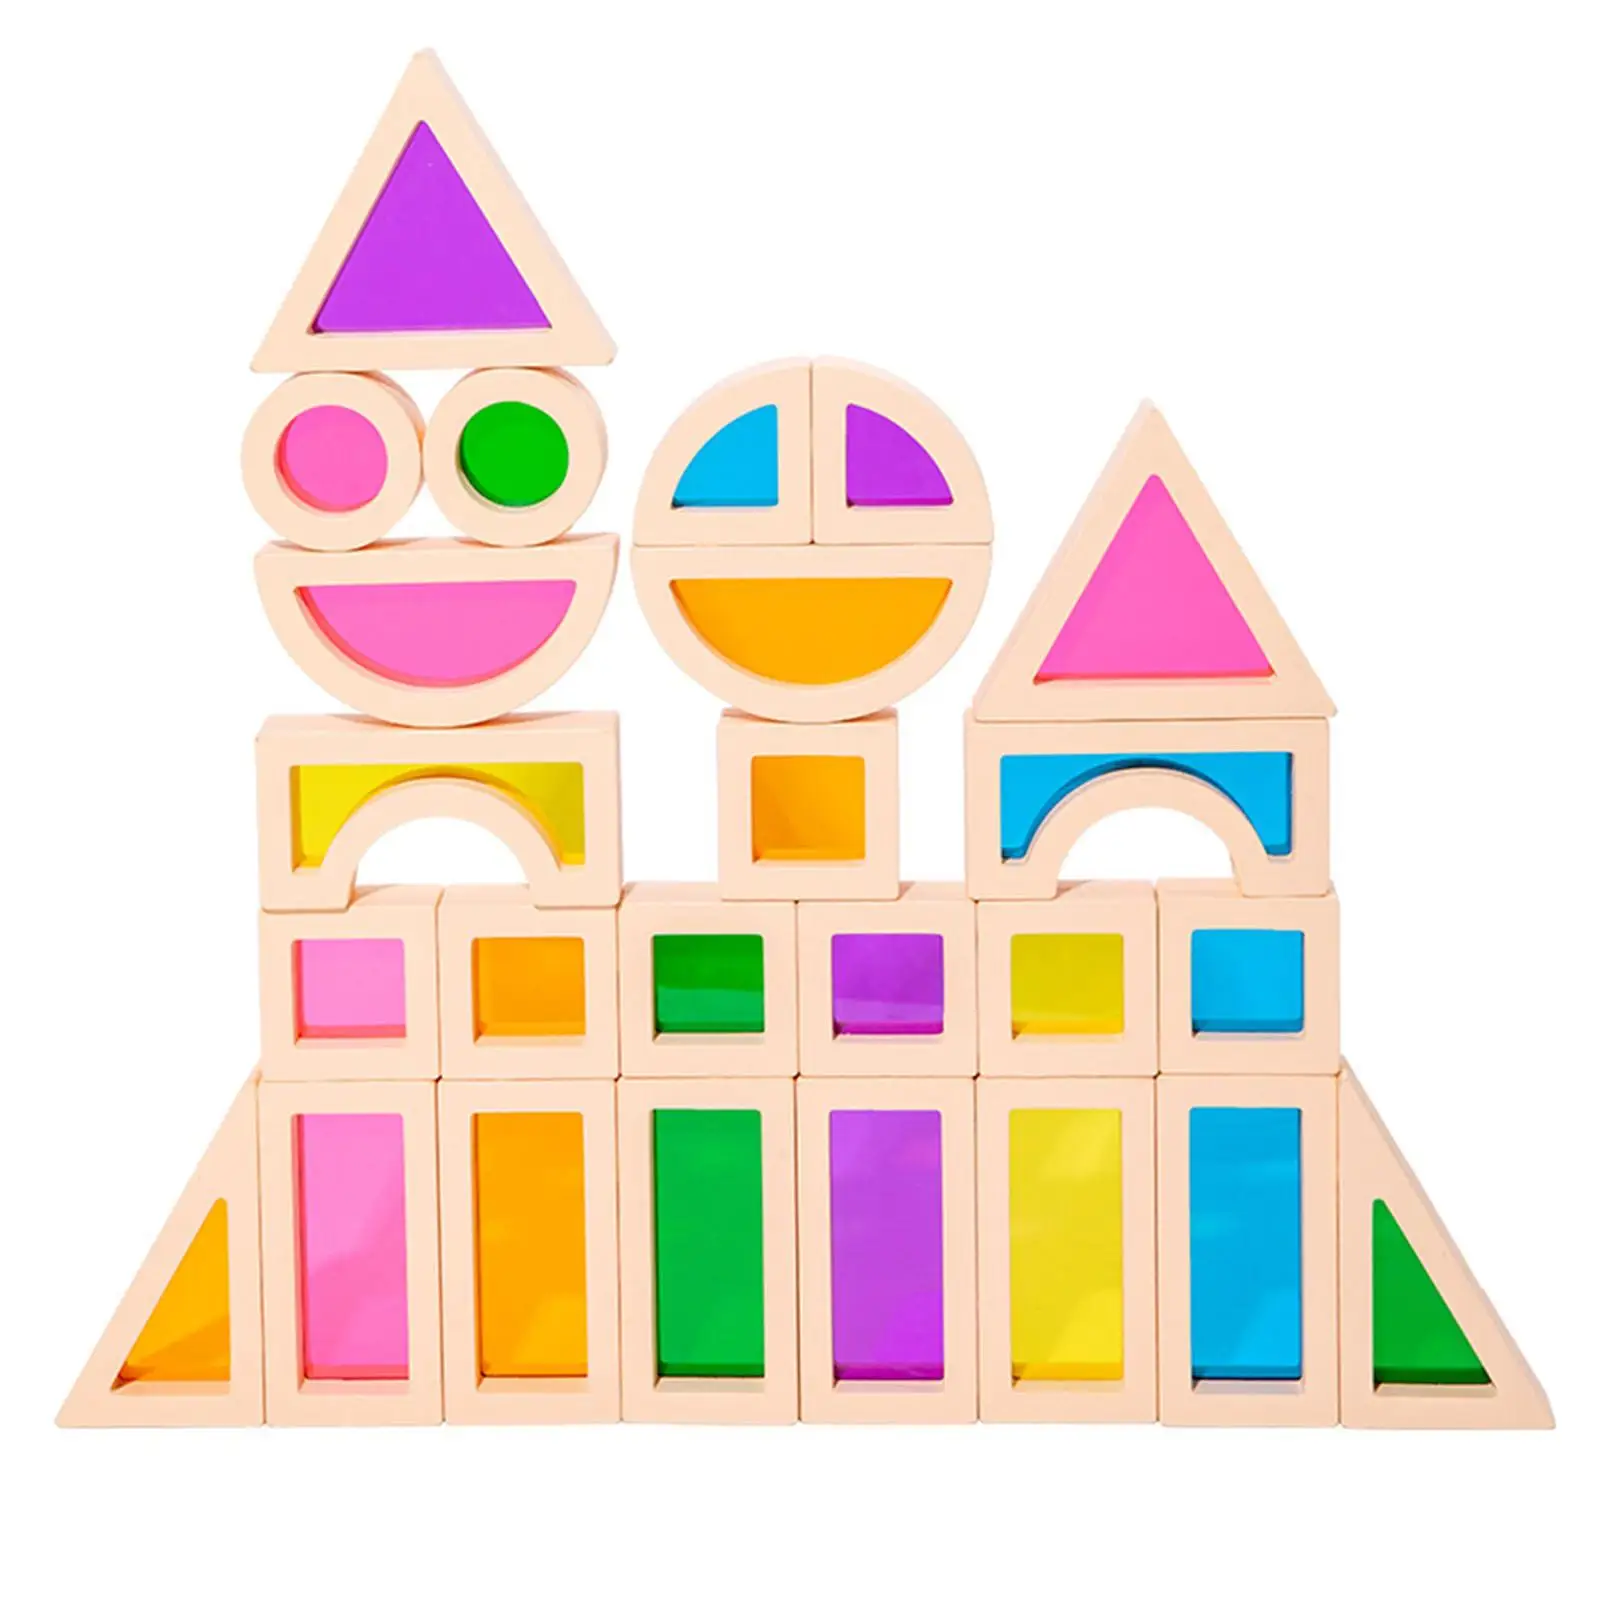 25 Pieces Stacking Building Blocks Educational Toys Toddlers Developmental Toys Colors Shapes Early Learning for Preschool